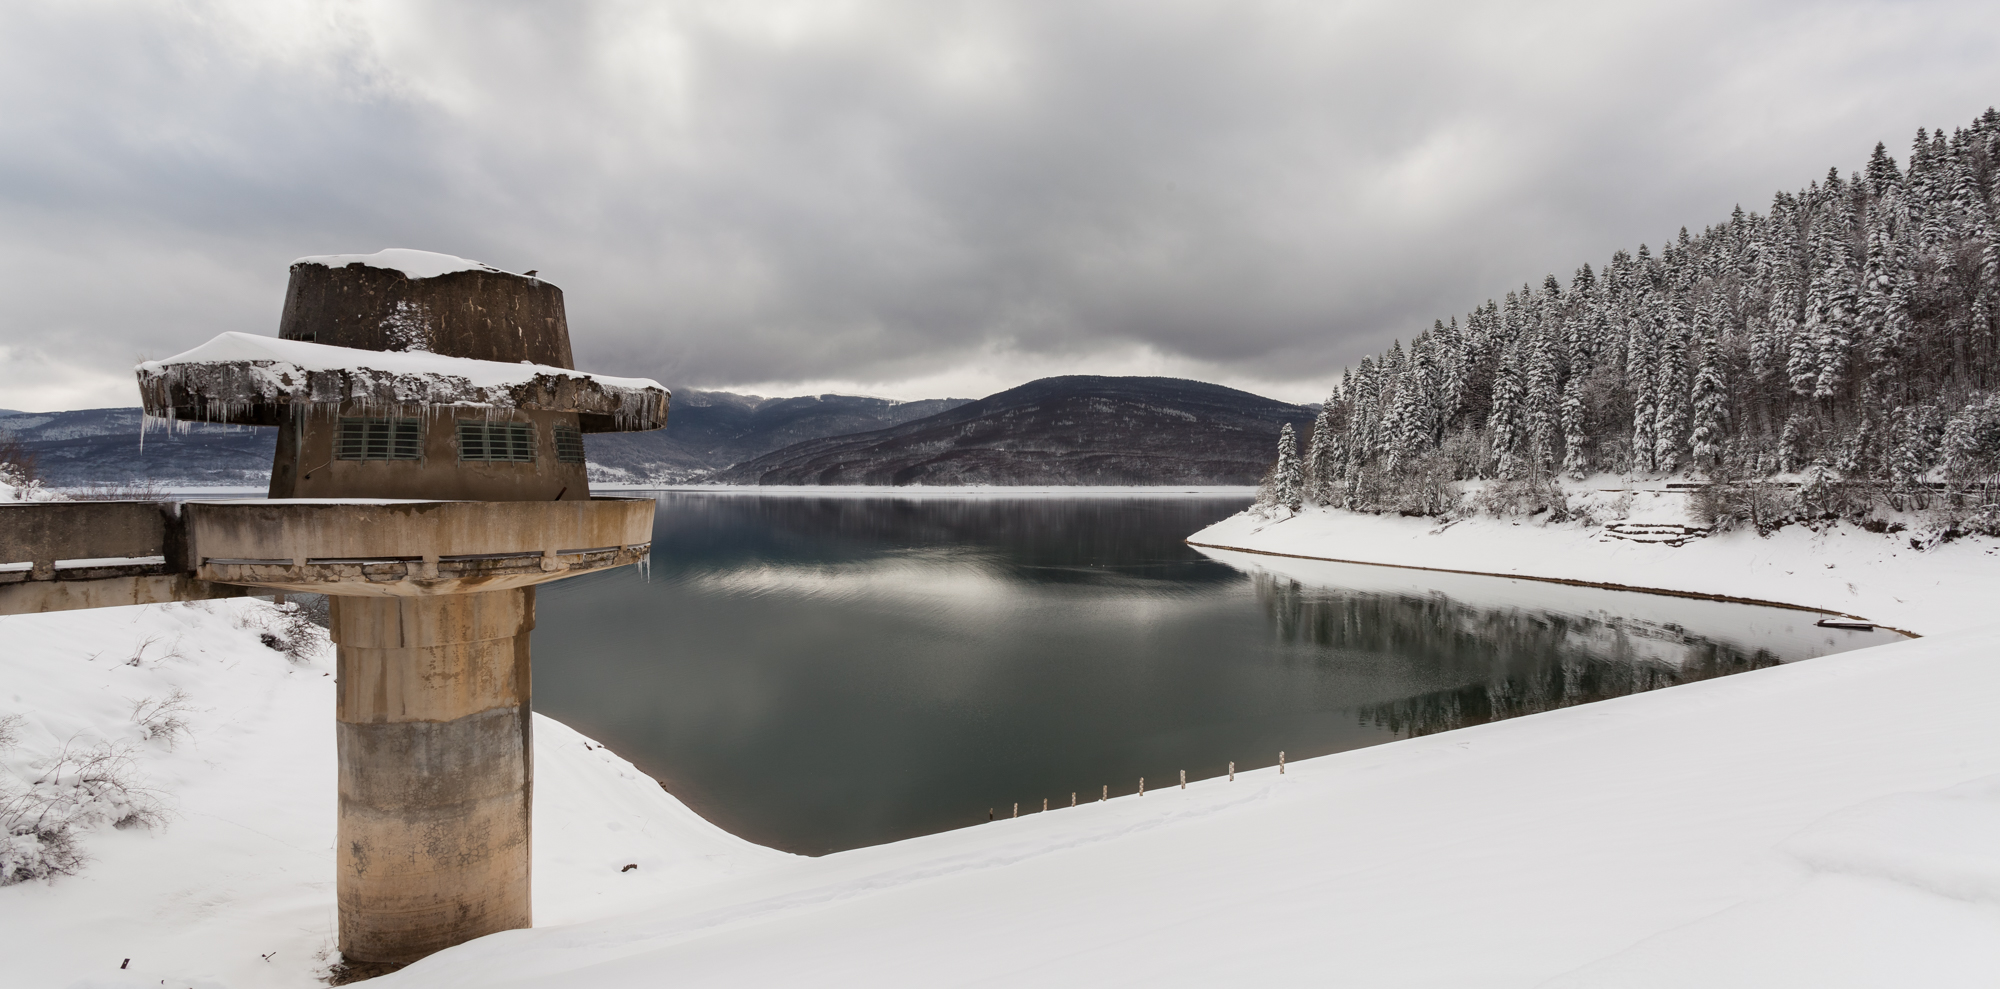 Winter scene of the watching tower, dam and Mavrovo Lake, Mavrovo National Park, Republic of Macedonia. The park, founded in 1949, is the largest (of the three existing) in the country with 780 km2, while the lake has a length of 10 km and a width of 5 km.